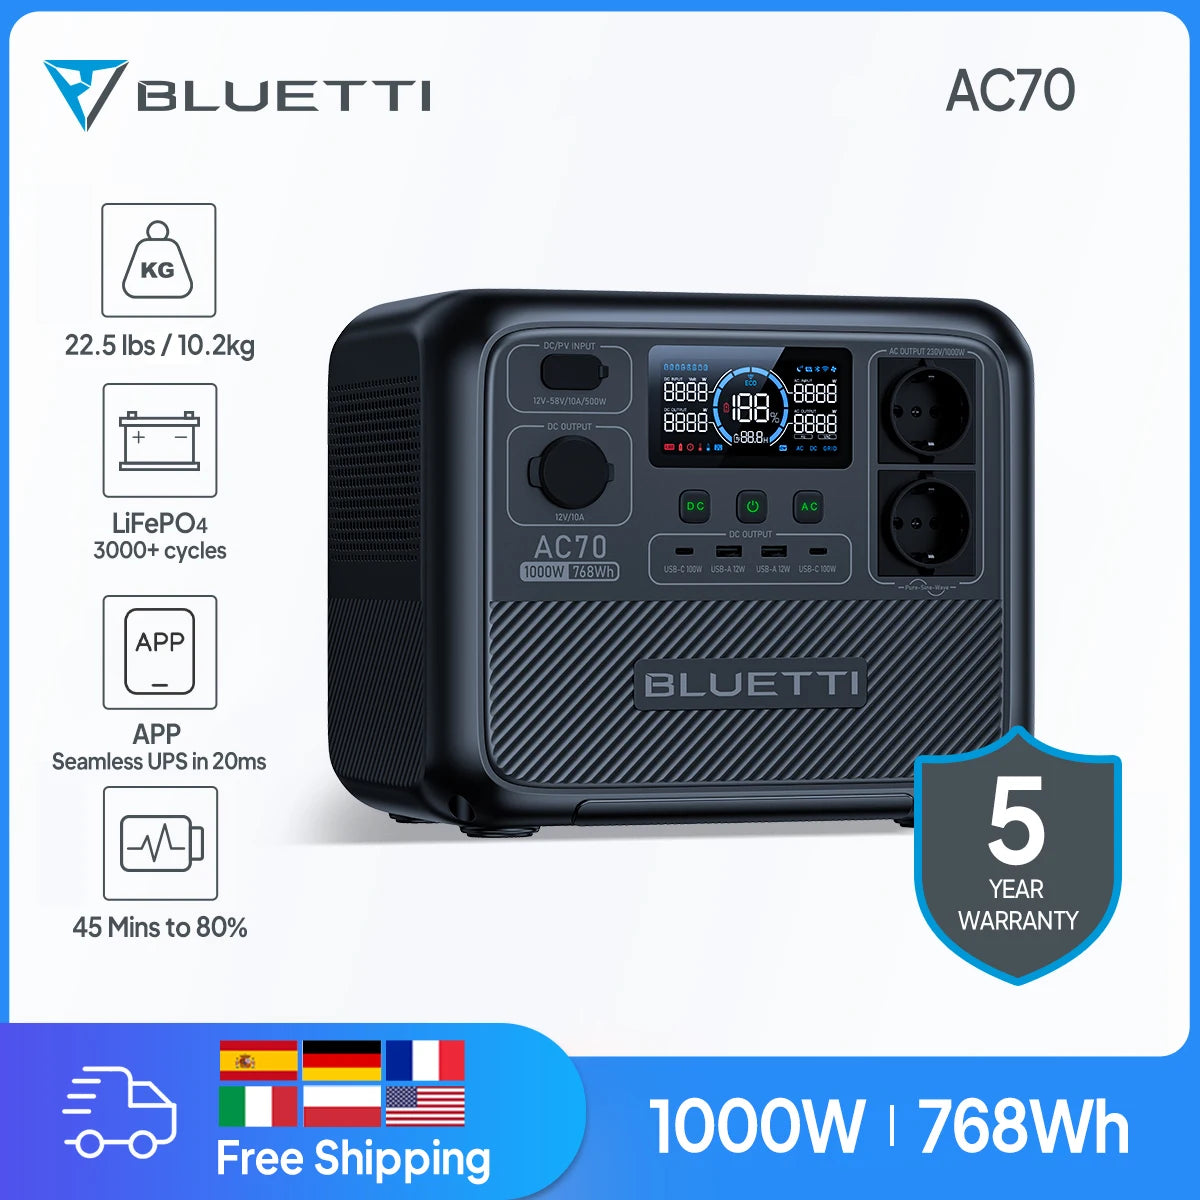 BLUETTI AC70 768Wh 1000W Portable Power Station Sloar Generator Camping Fishing Disaster Prevention Emergency RV Power Supply - IHavePaws